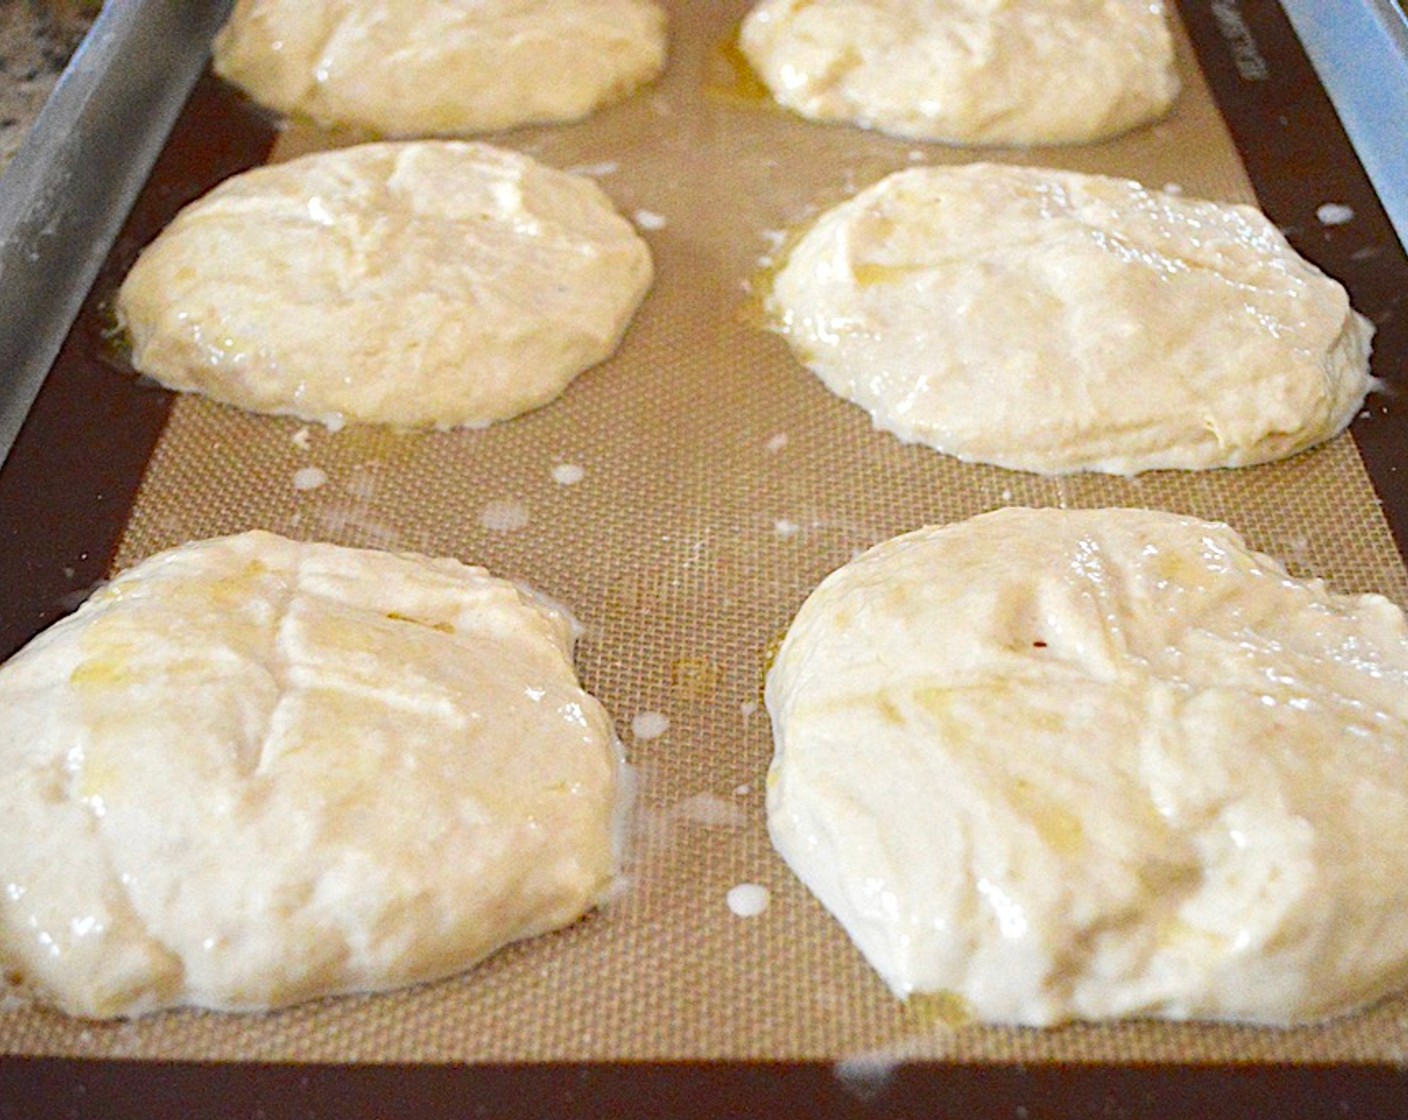 step 8 Score a plus sign on the tops of each bun for some interest, then brush them all well with the Butter (1/4 cup). Finally, sprinkle them all generously with Sea Salt (to taste) on top.